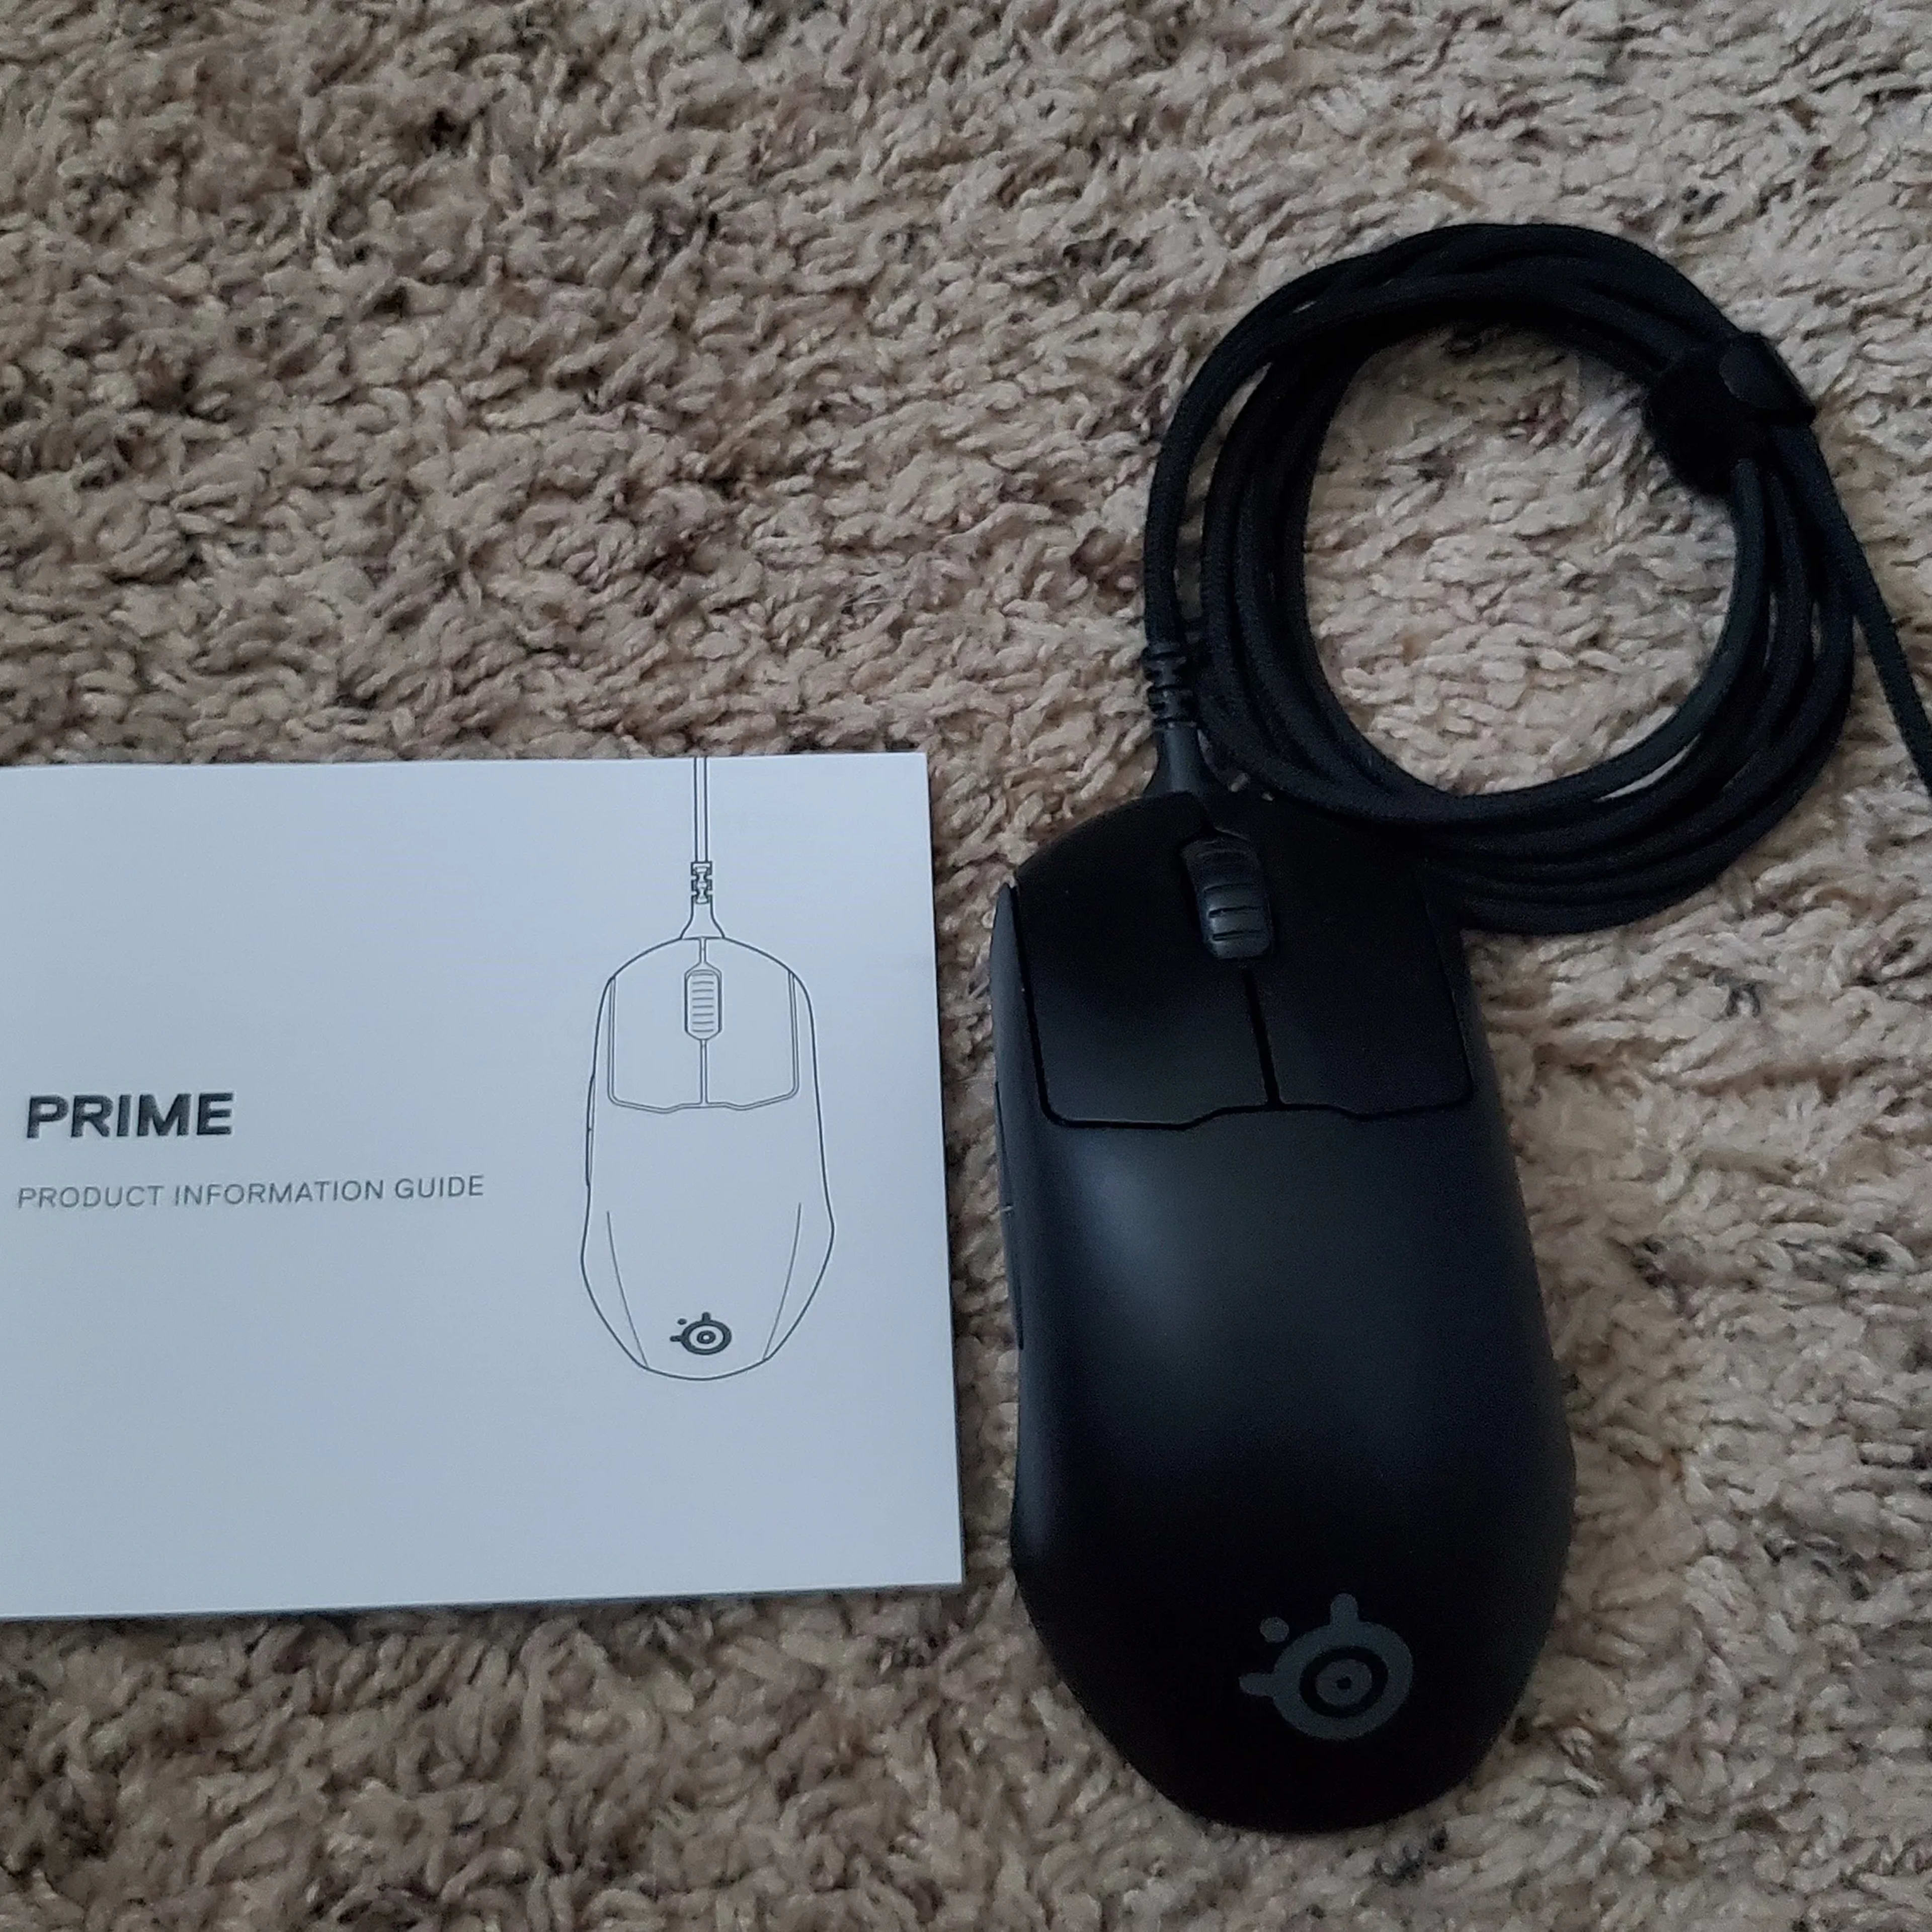 Steelseries Prime Mouse